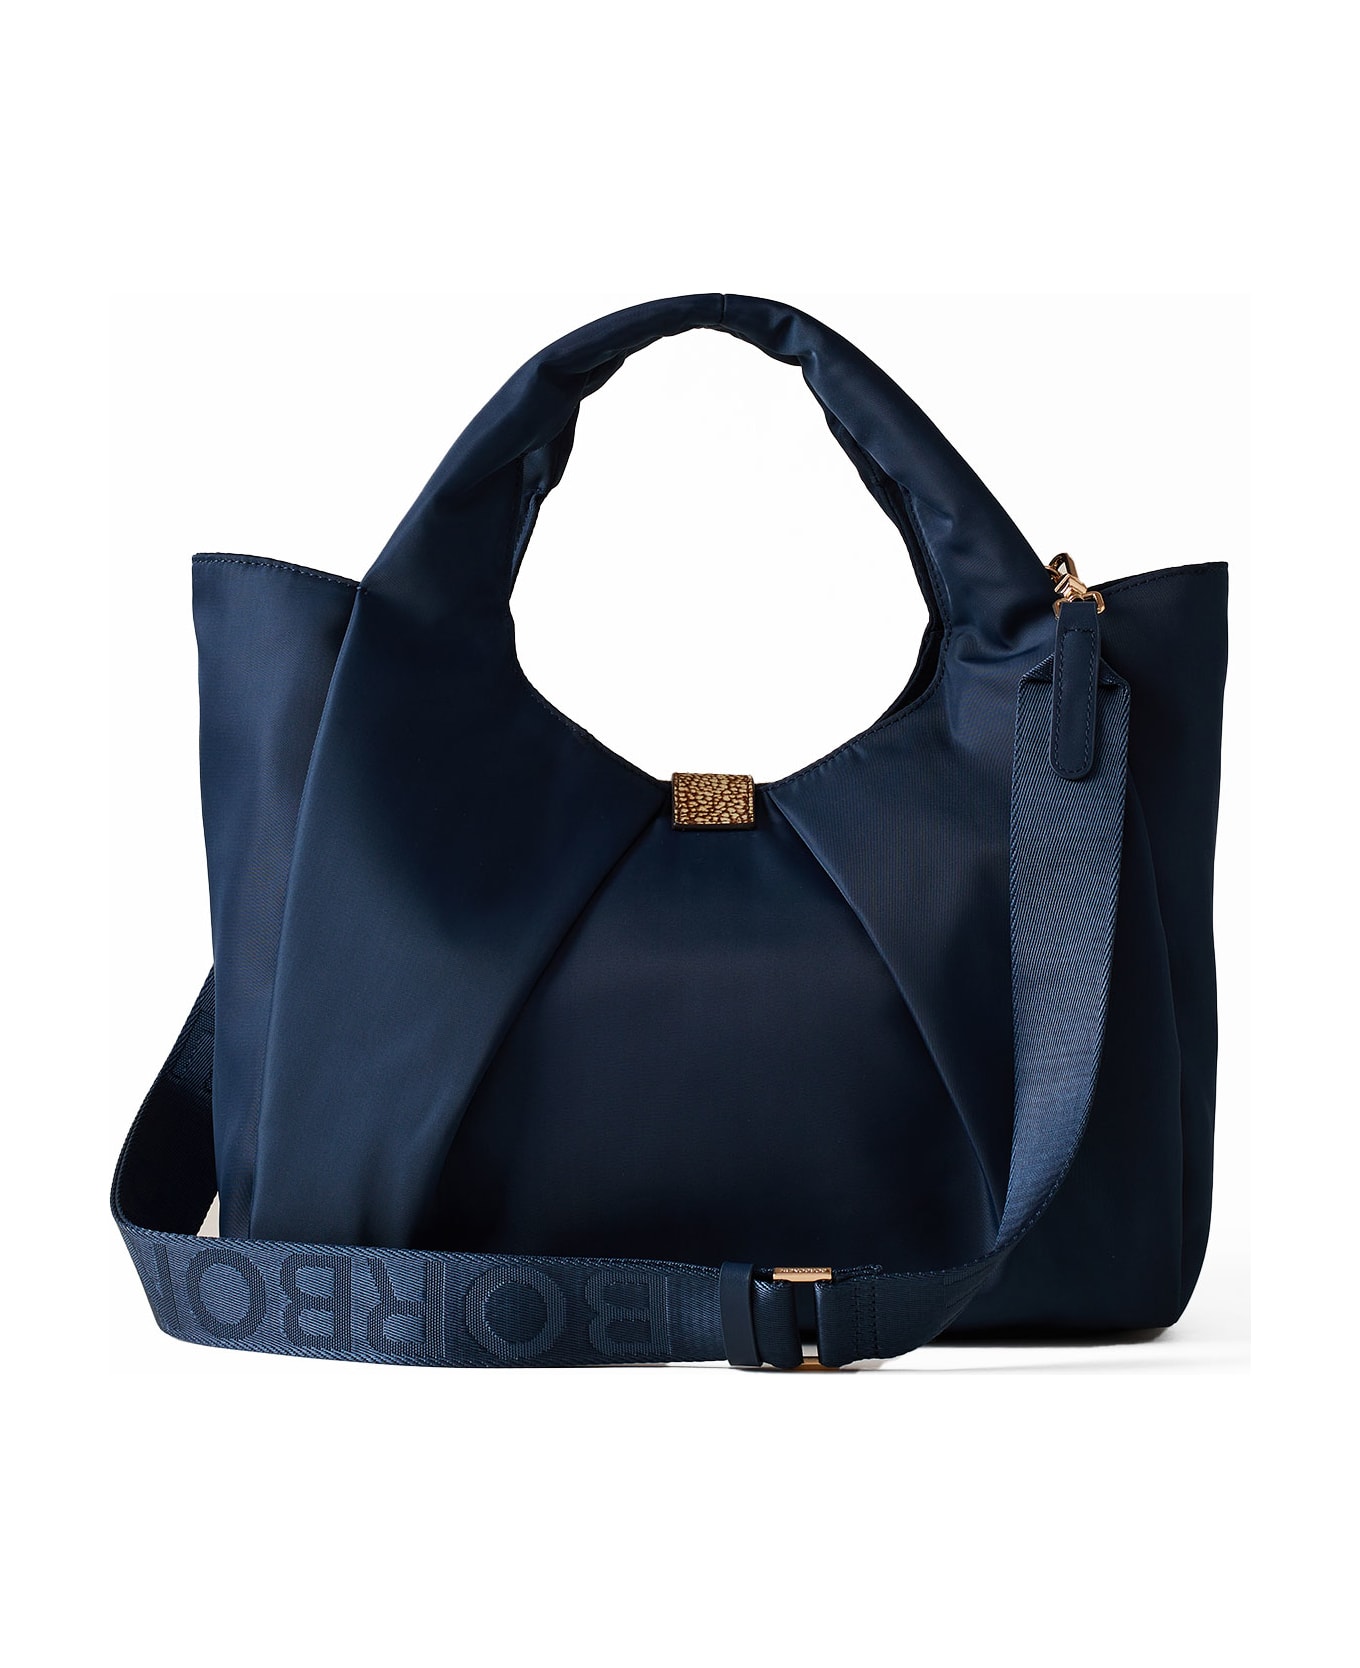 Borbonese Fabric And Leather Handbag With Shoulder Strap - BLU PRUSSIA/OP NAURALE トートバッグ